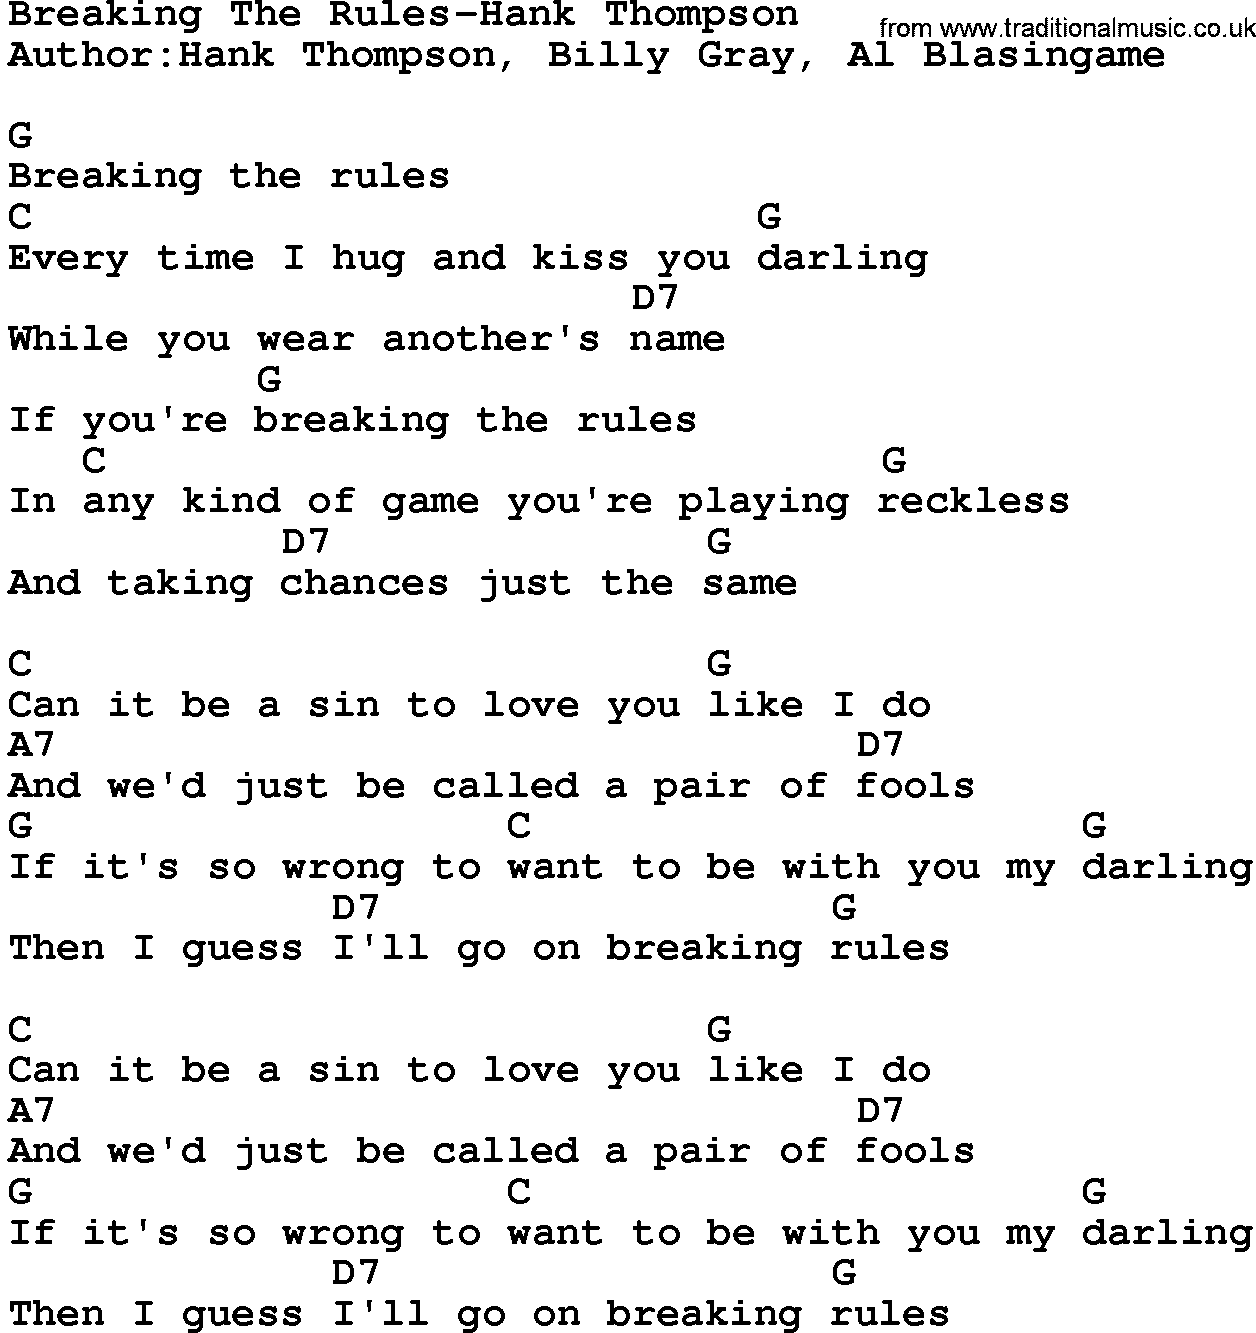 Country music song: Breaking The Rules-Hank Thompson lyrics and chords